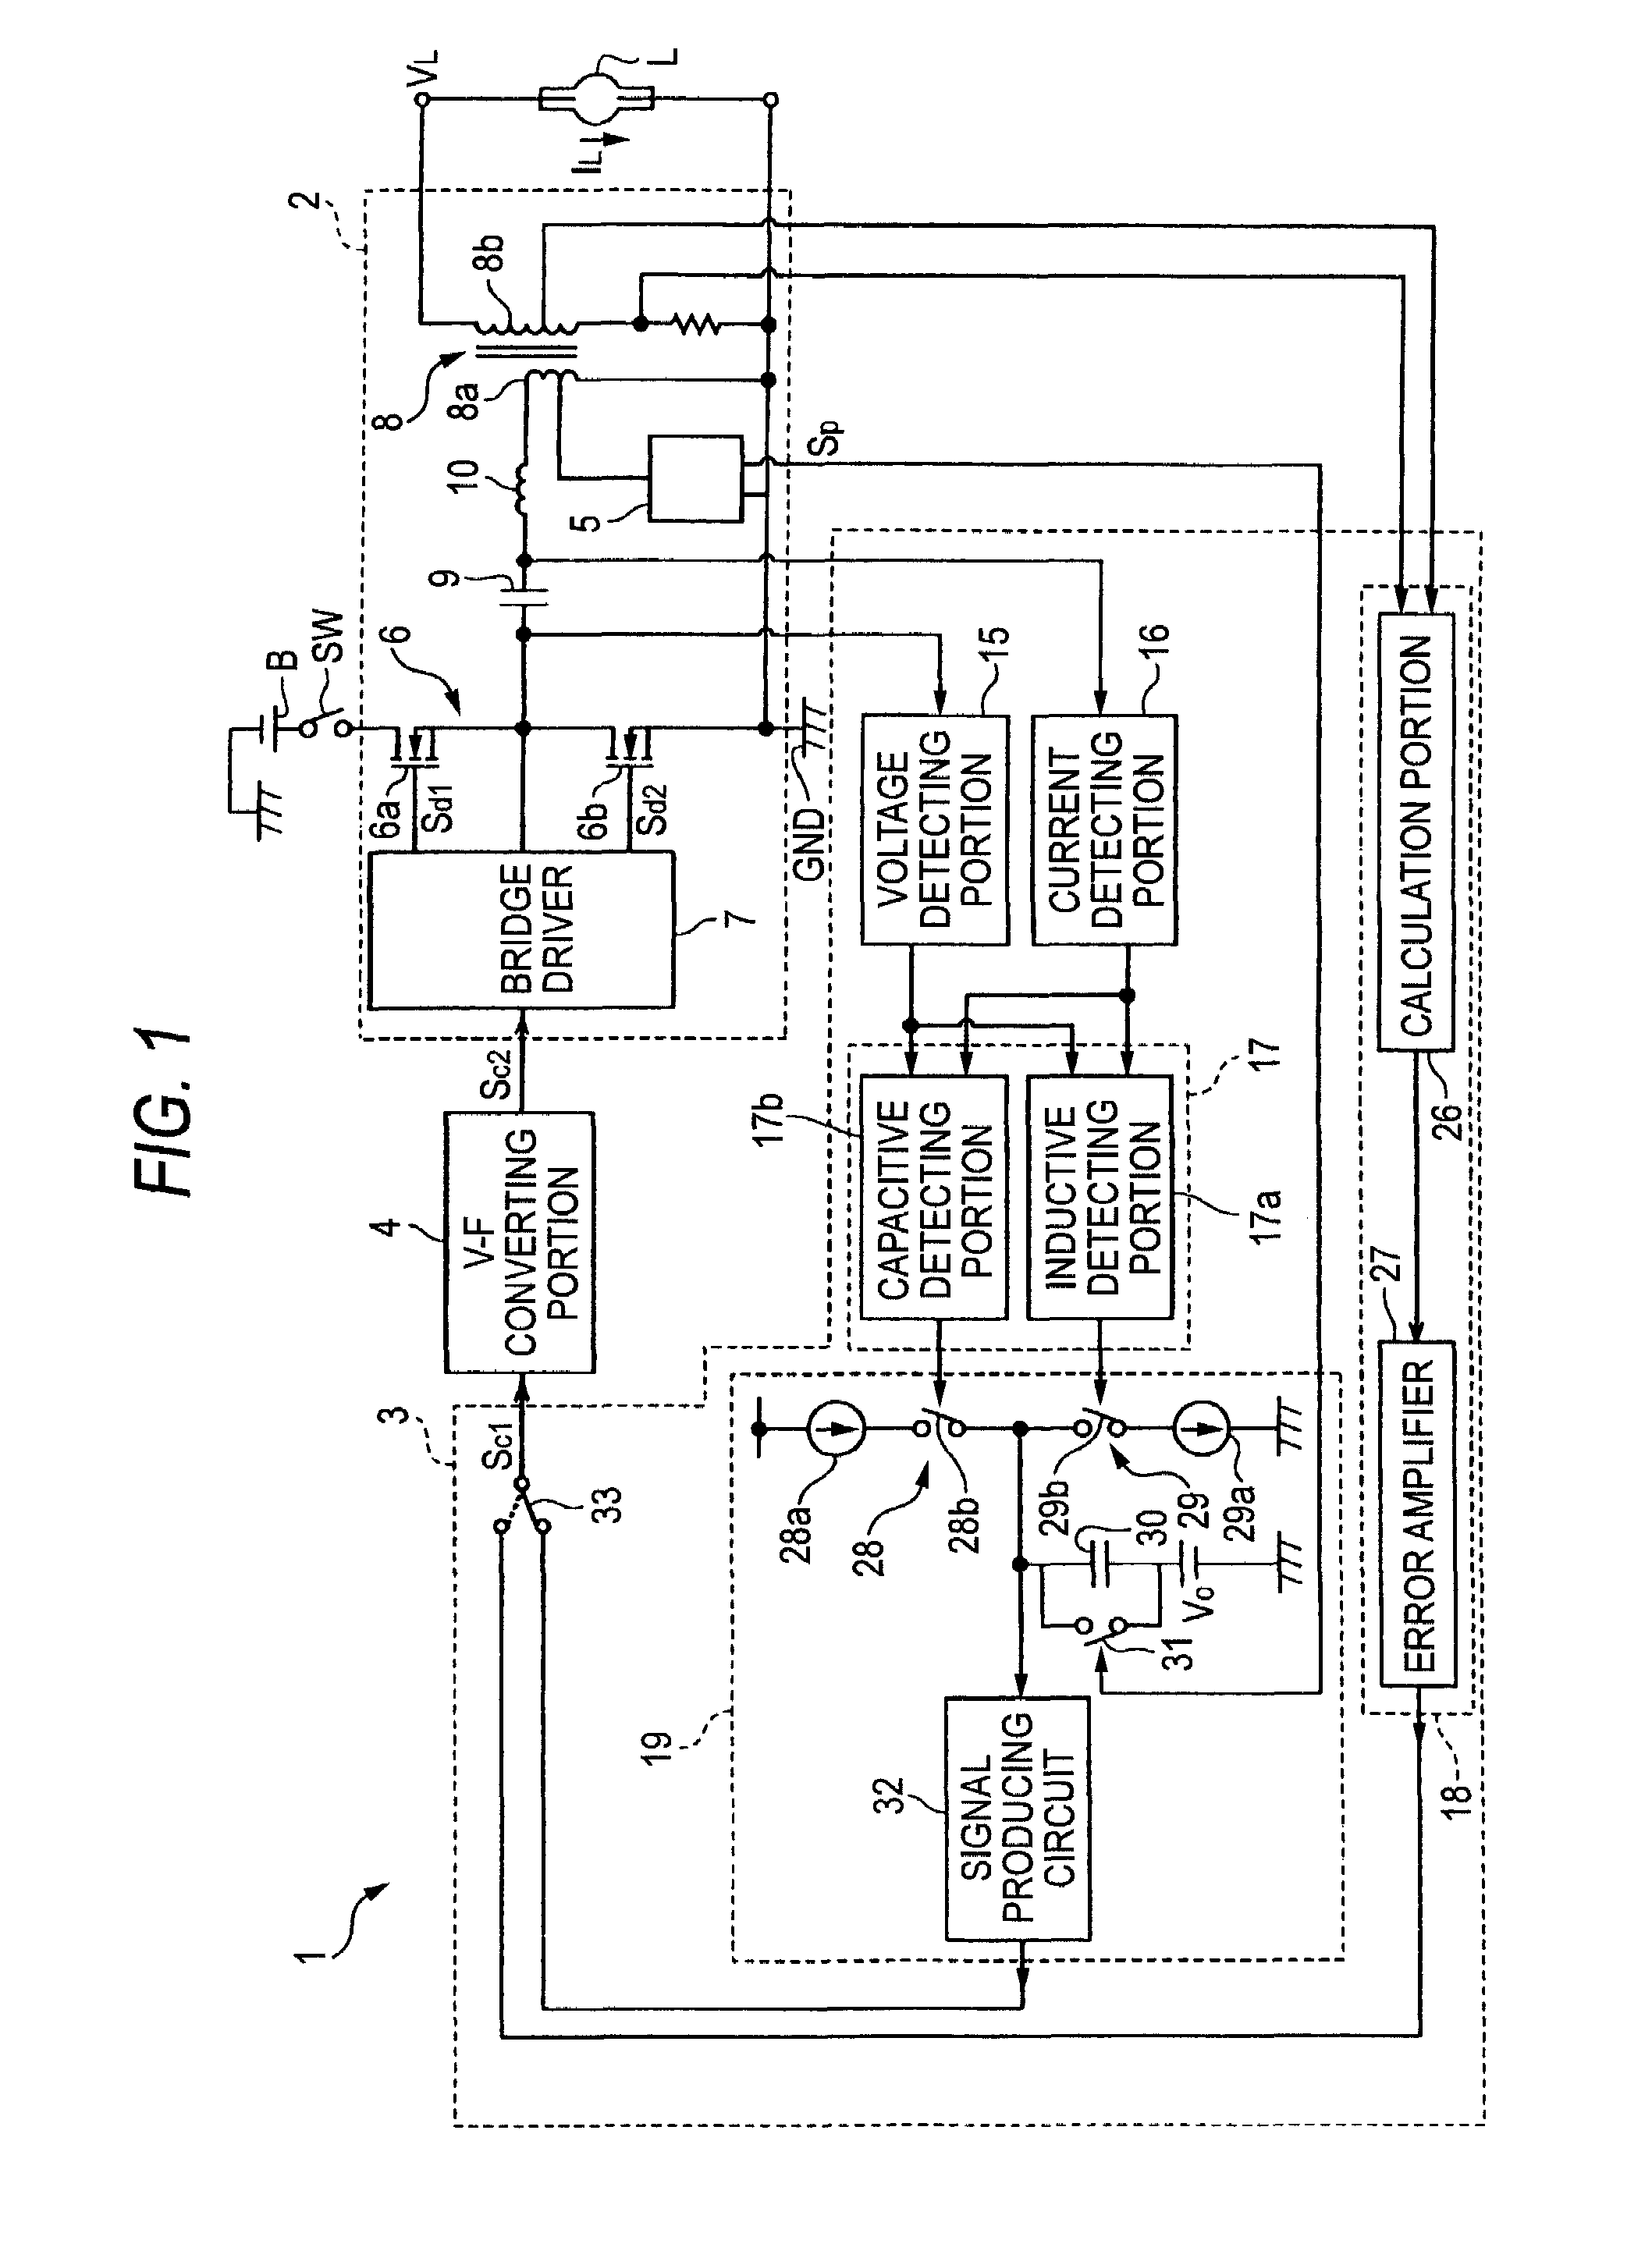 Discharge lamp lighting circuit with frequency control in accordance with phase difference